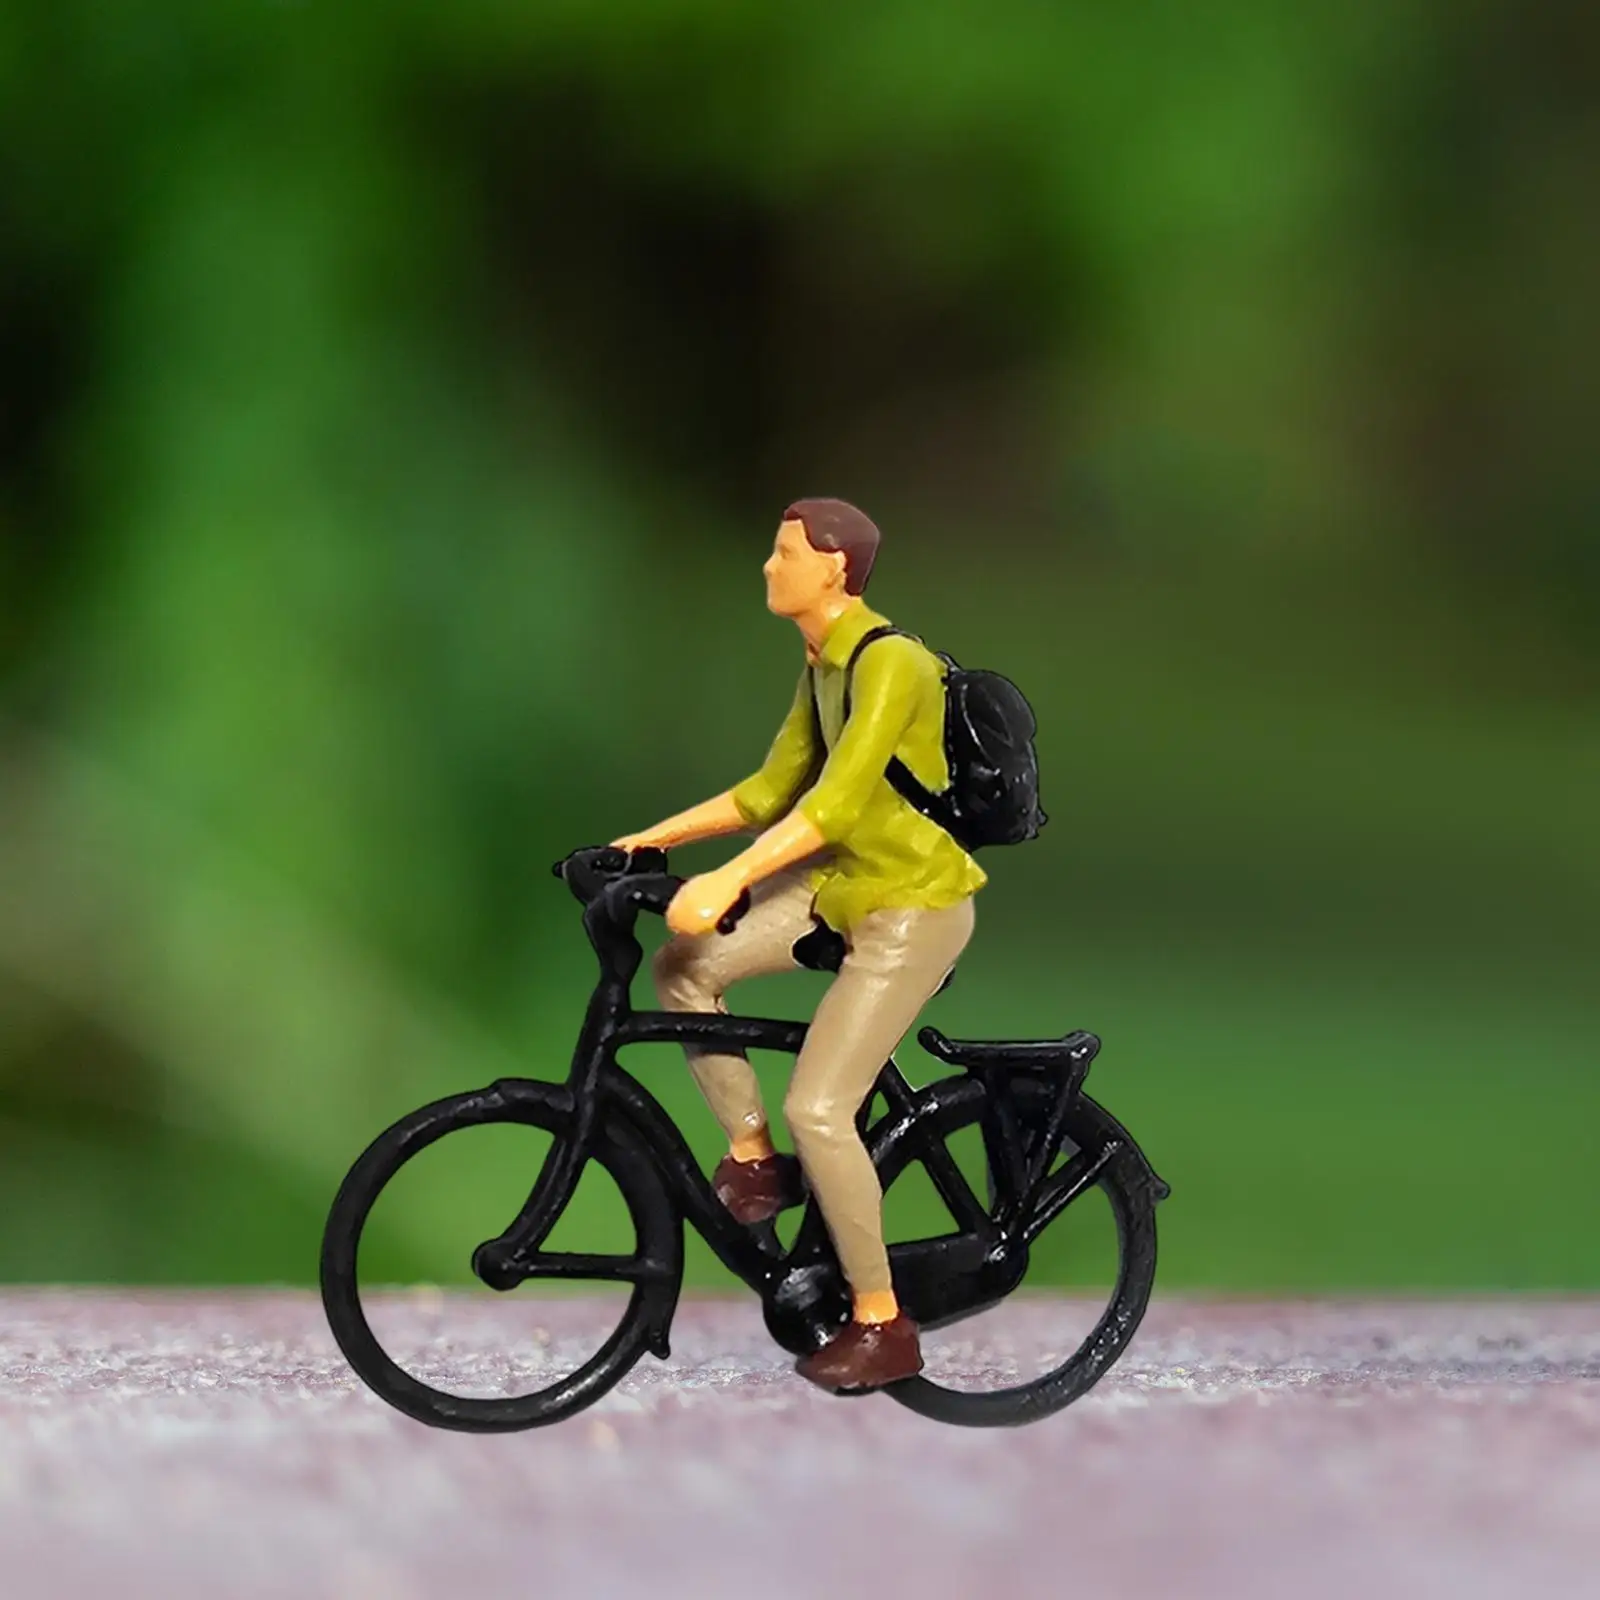 Realistic 1/87 Scale Cyclist Figurine Ornament for Diorama Layout Decoration